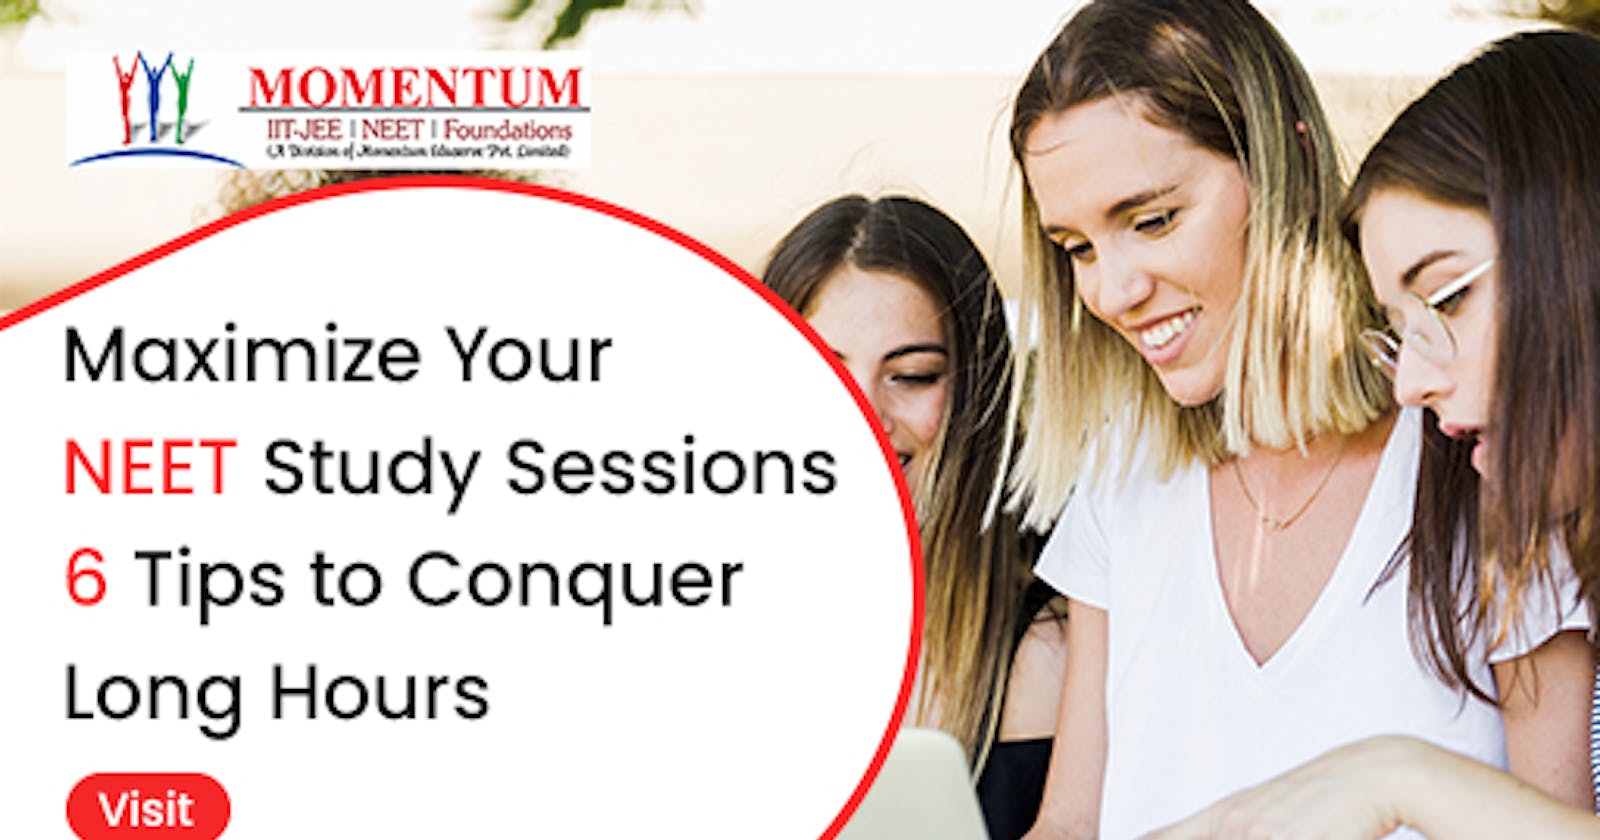 Maximize Your NEET Study Sessions: 6 Tips to Conquer Long Hours